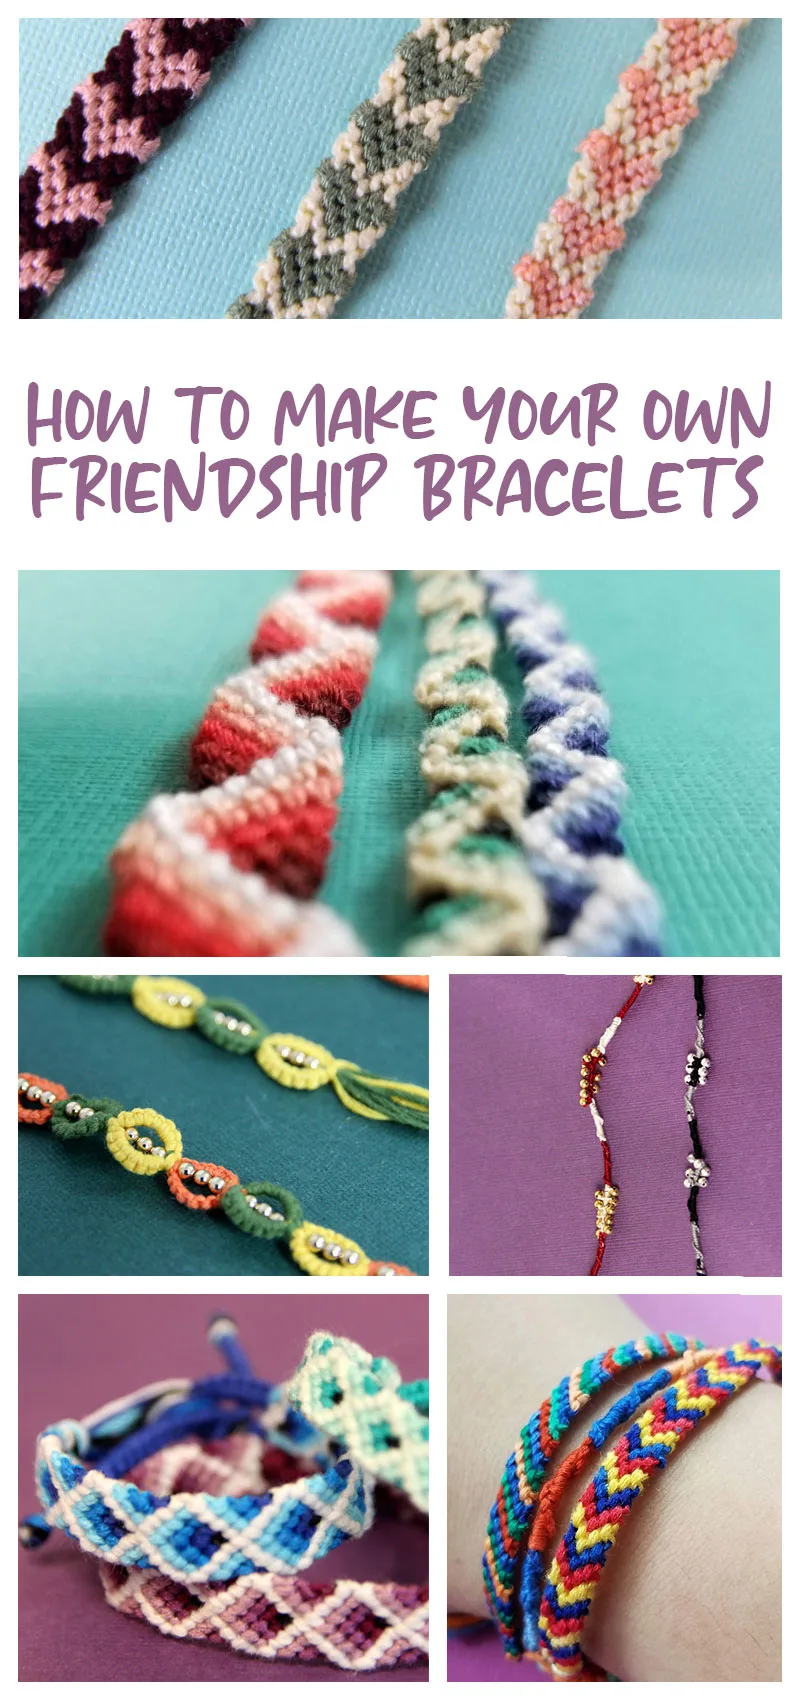 How to make a friendship bracelet from scratch